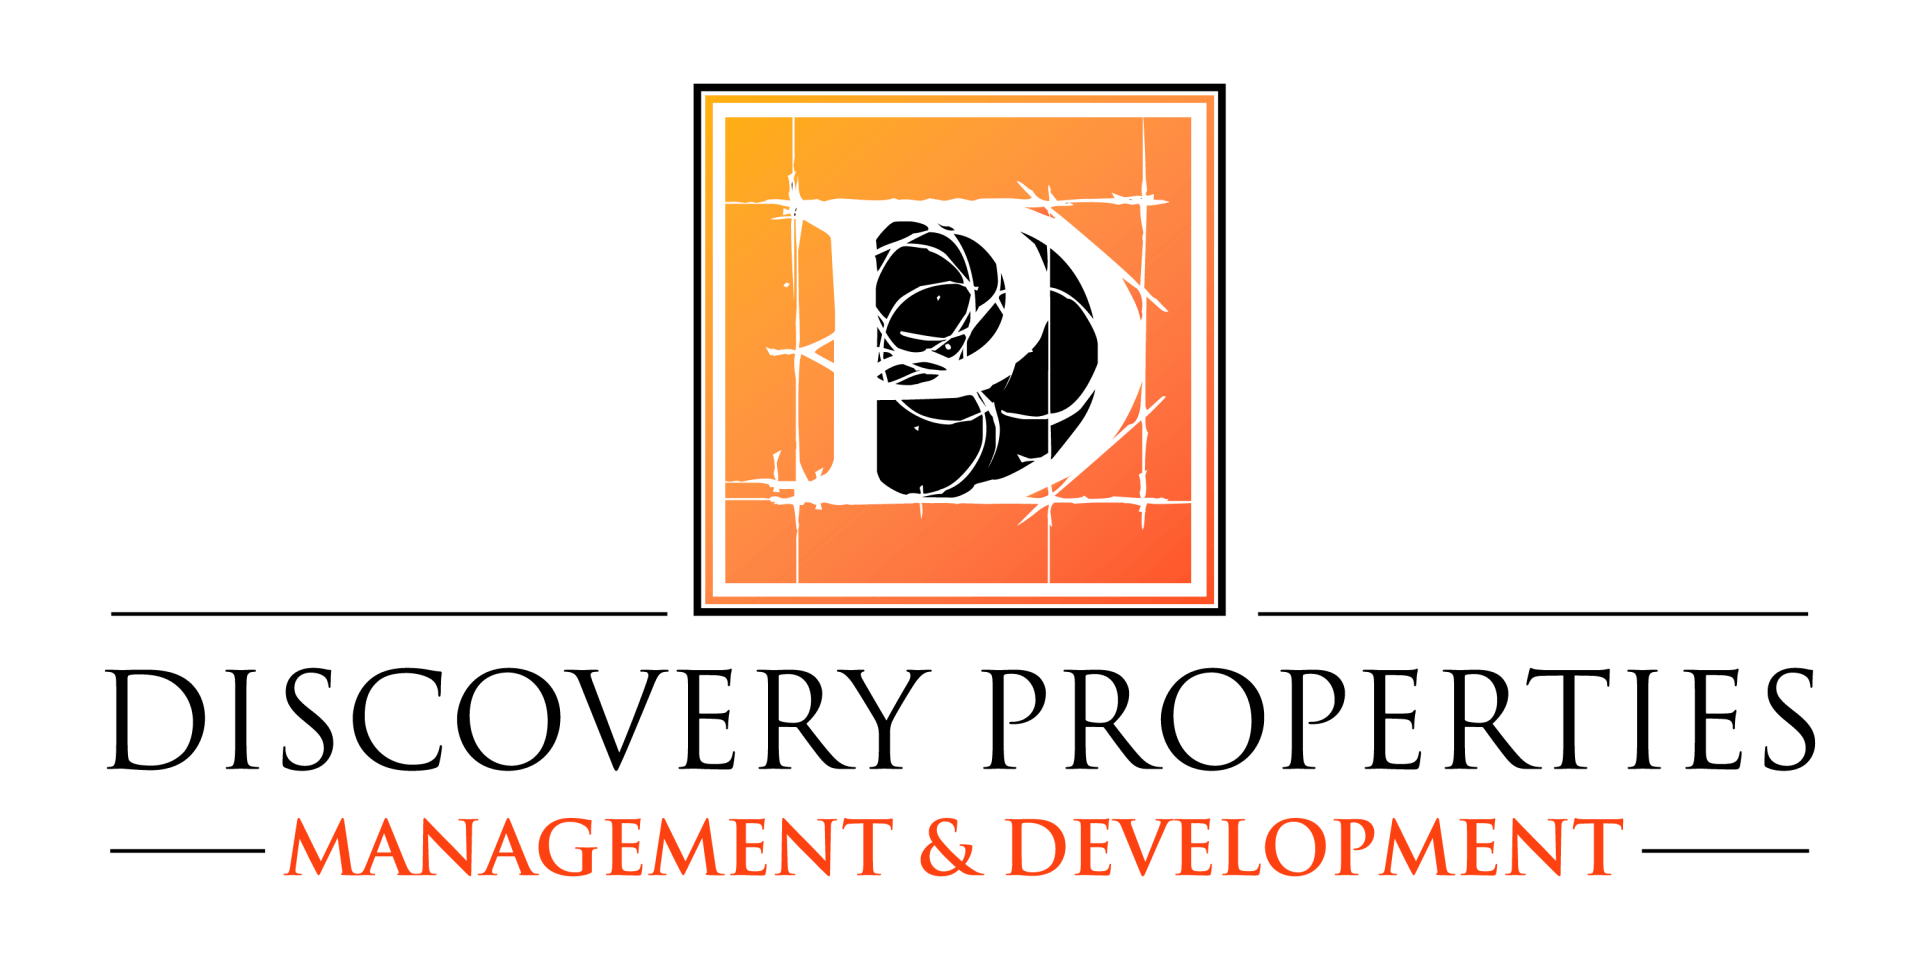 Discovery Properties Management & Development Logo  in Header - linked to home page